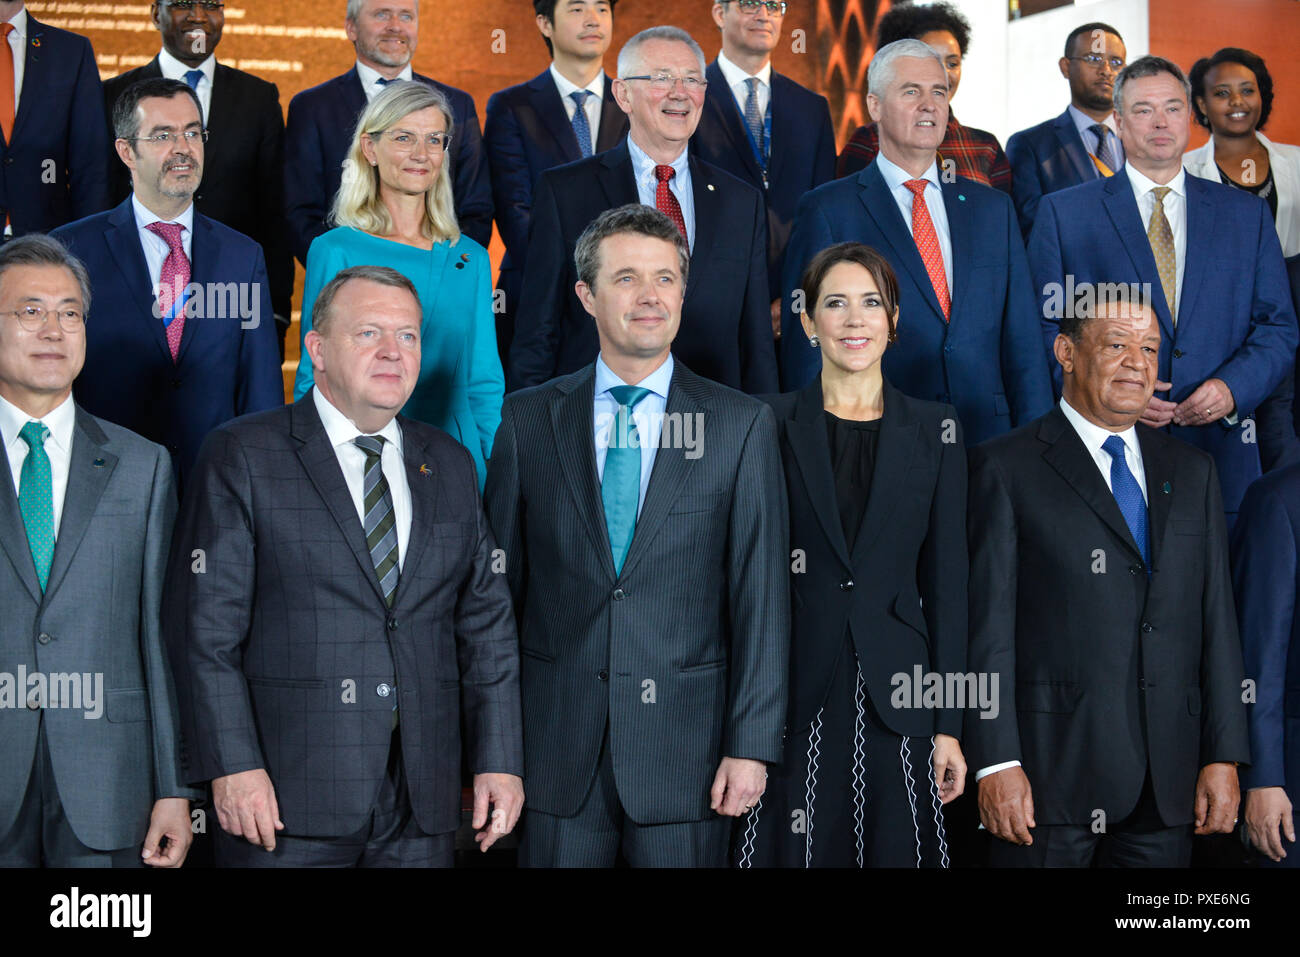 The Prime Minister of Denmark Lars Lokke Rasmussen (L) Crown Prince Frederik  (C) Crown Princess Mary (R) pose for a family picture during the P4G Copenhagen Summit 2018 at The Danish Radio Concert Hall. Stock Photo